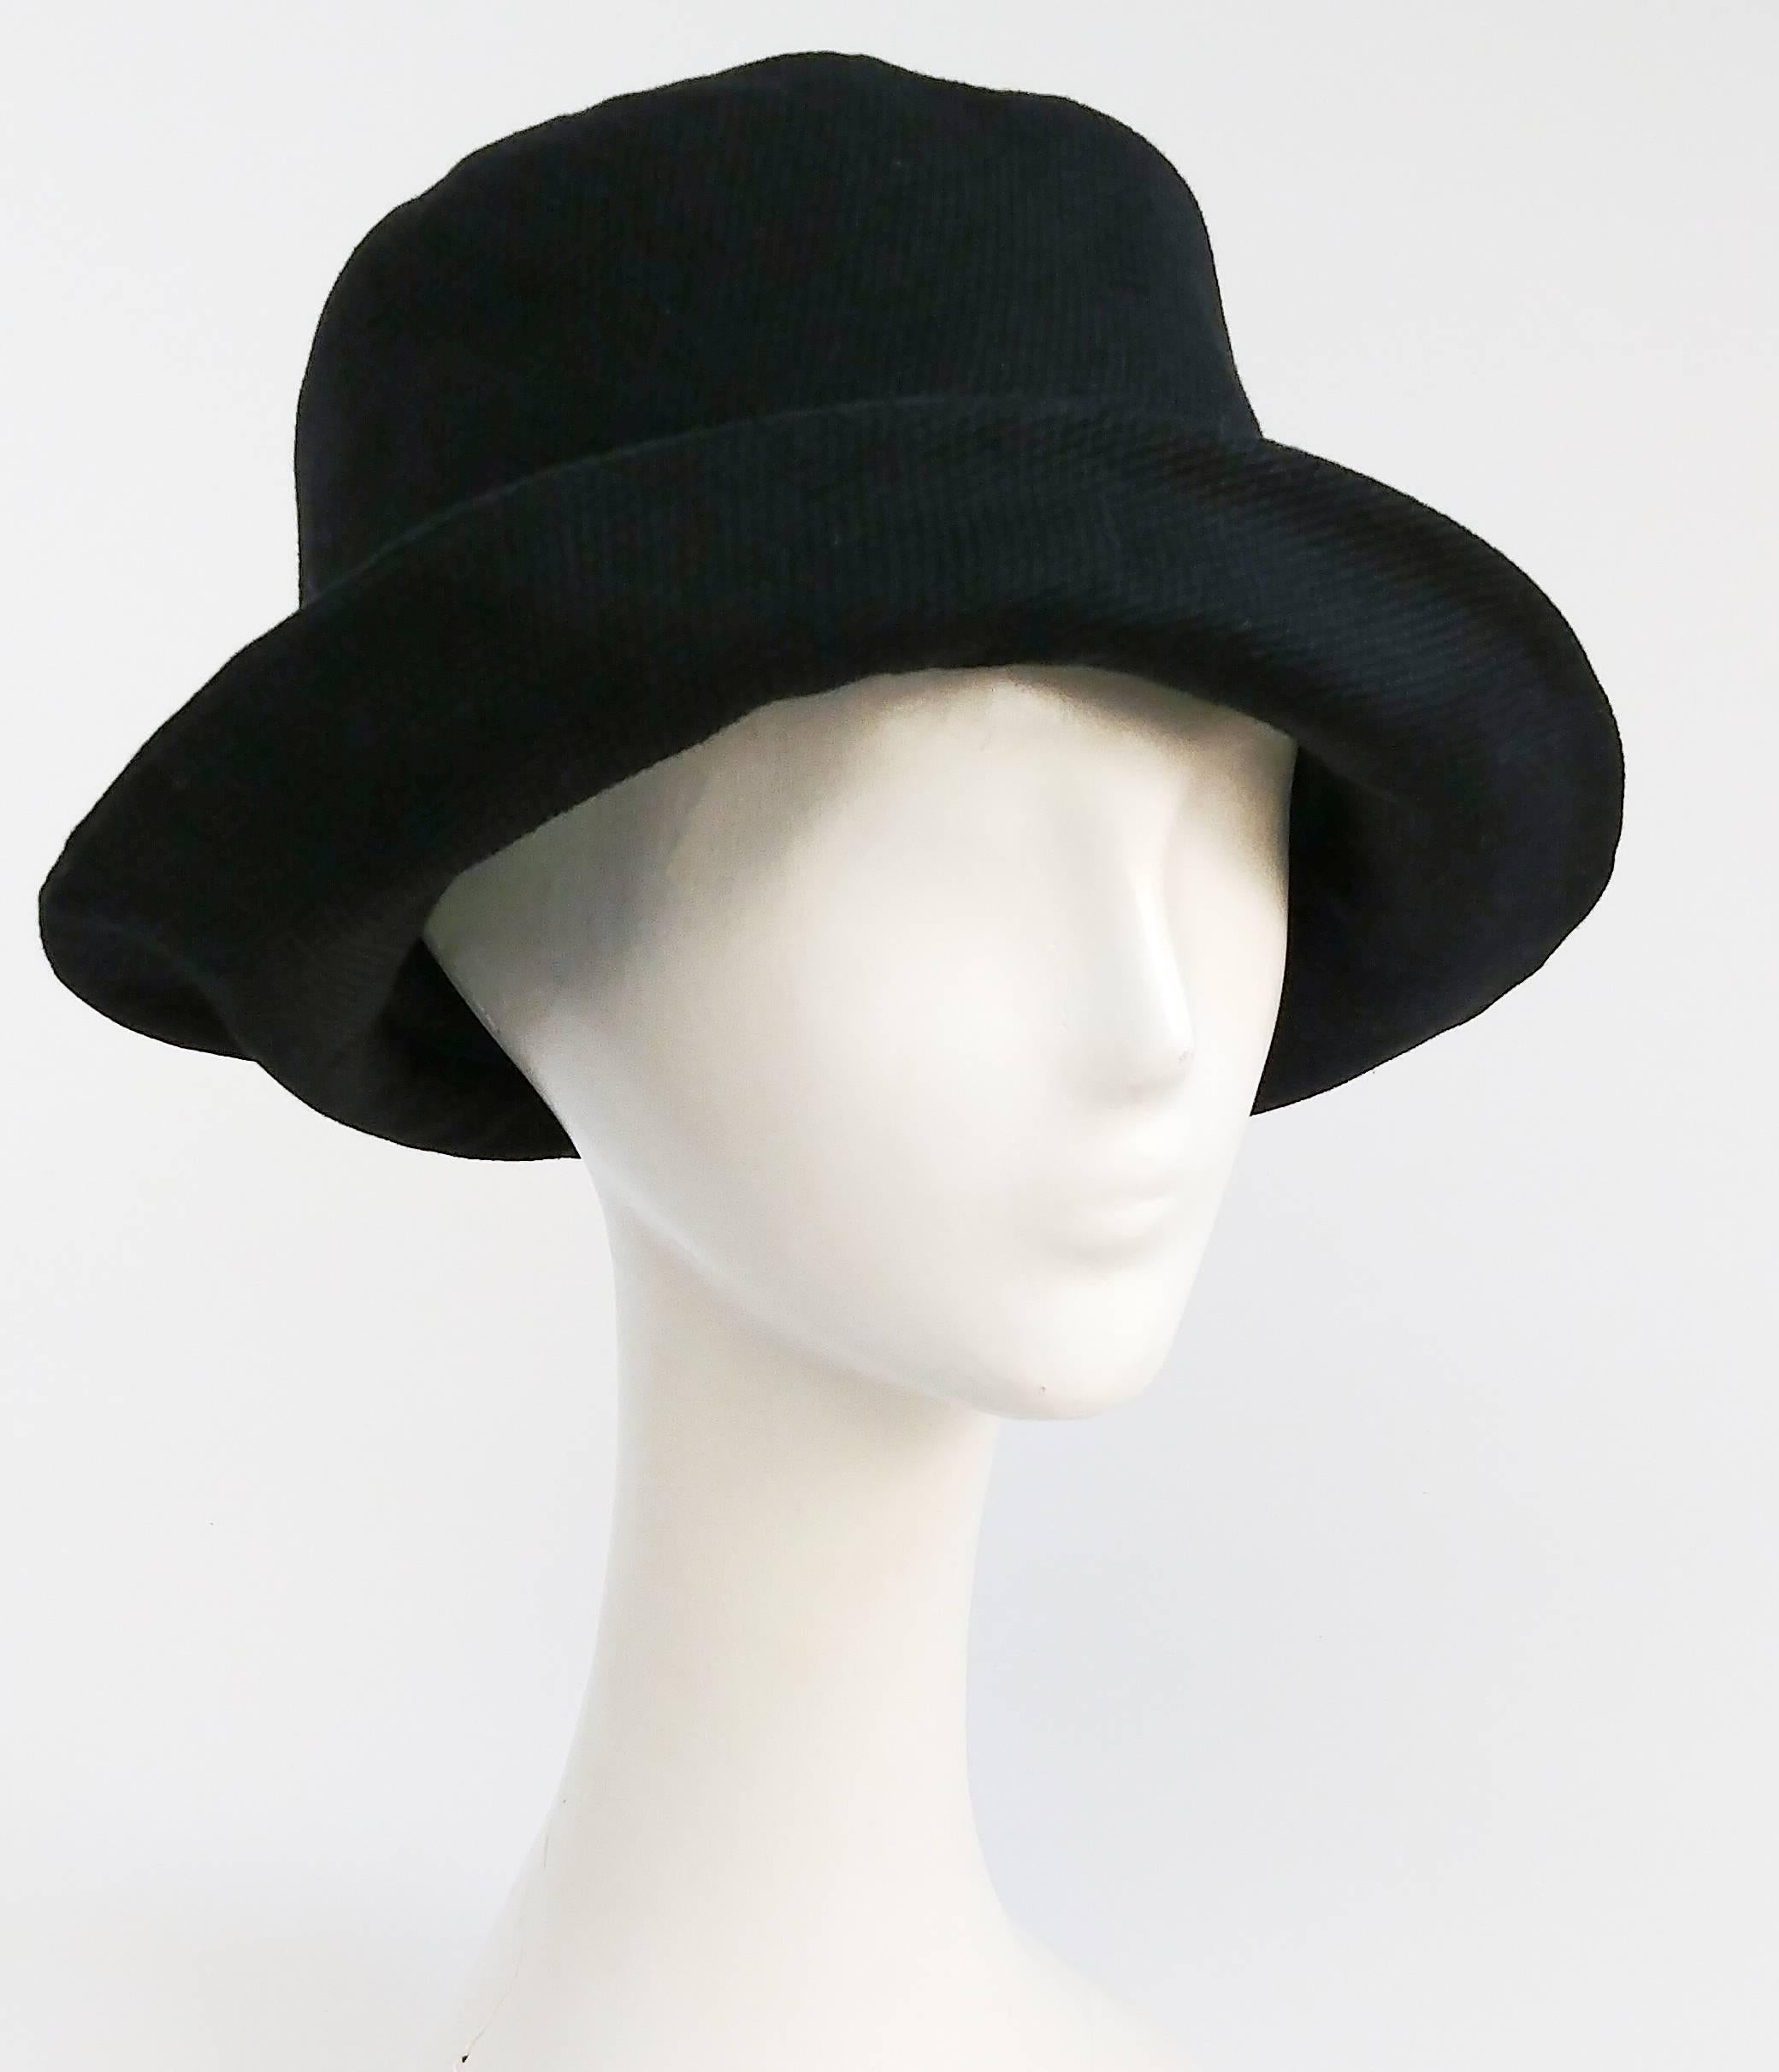 1960s Mod Black Pique Bucket Hat. Light cotton hat, great for warmer weather, lined with cotton twill. 21